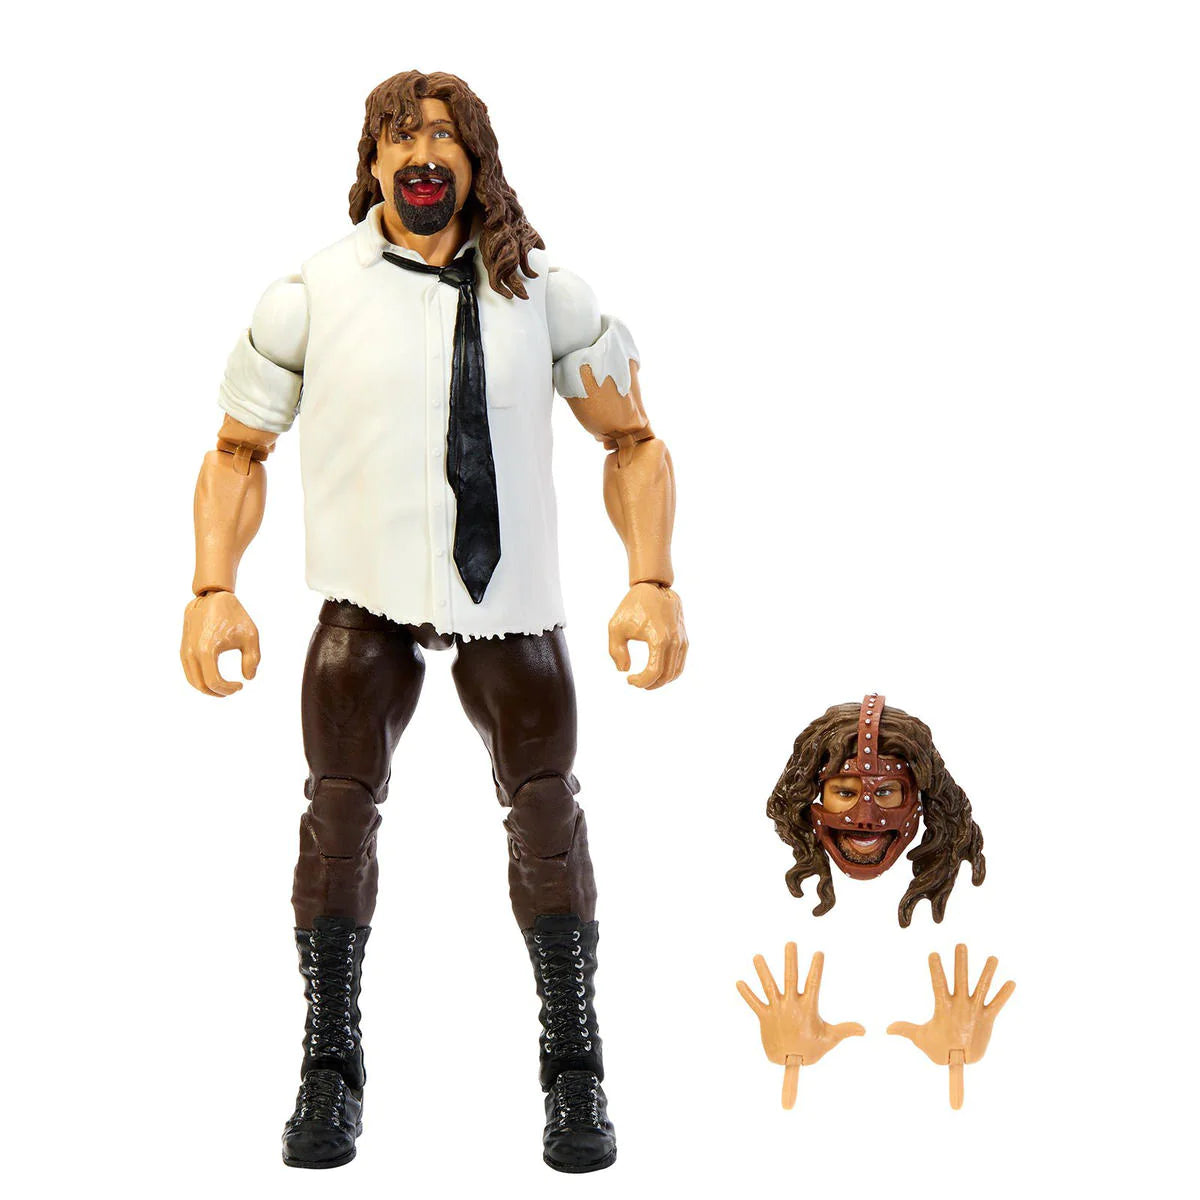 Mankind - WWE Defining Moments 2023 Action Figure